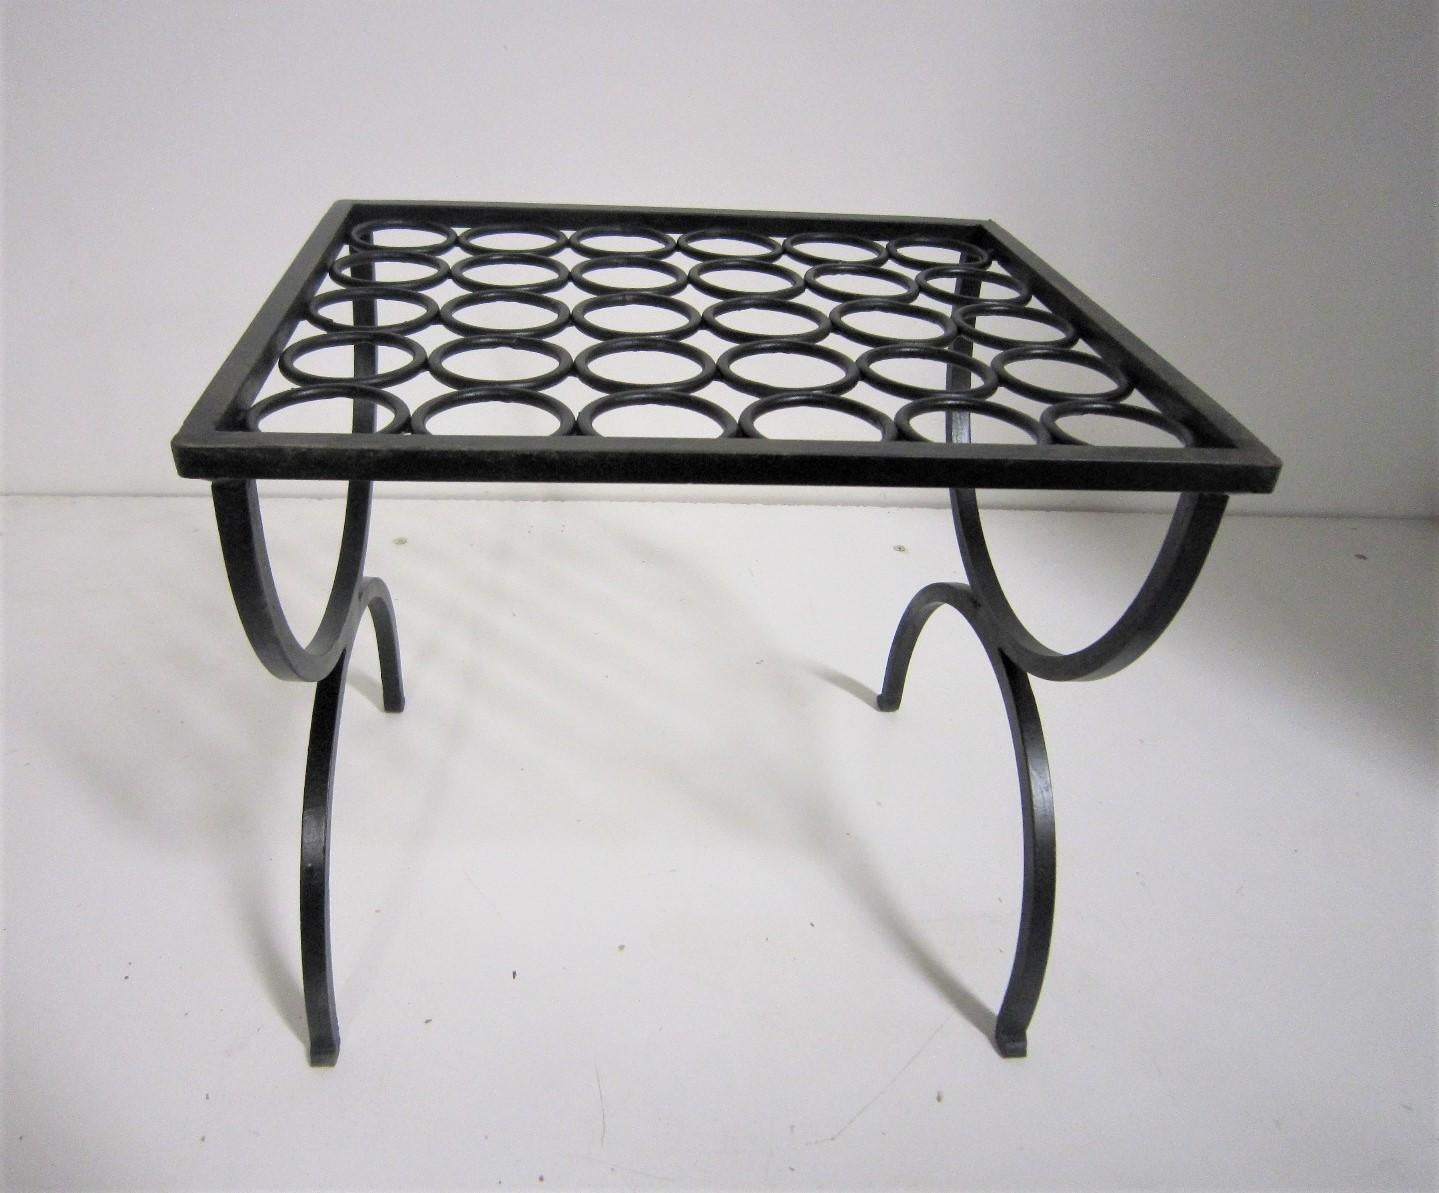 An original period wrought iron foot stool with circular pattern and double 